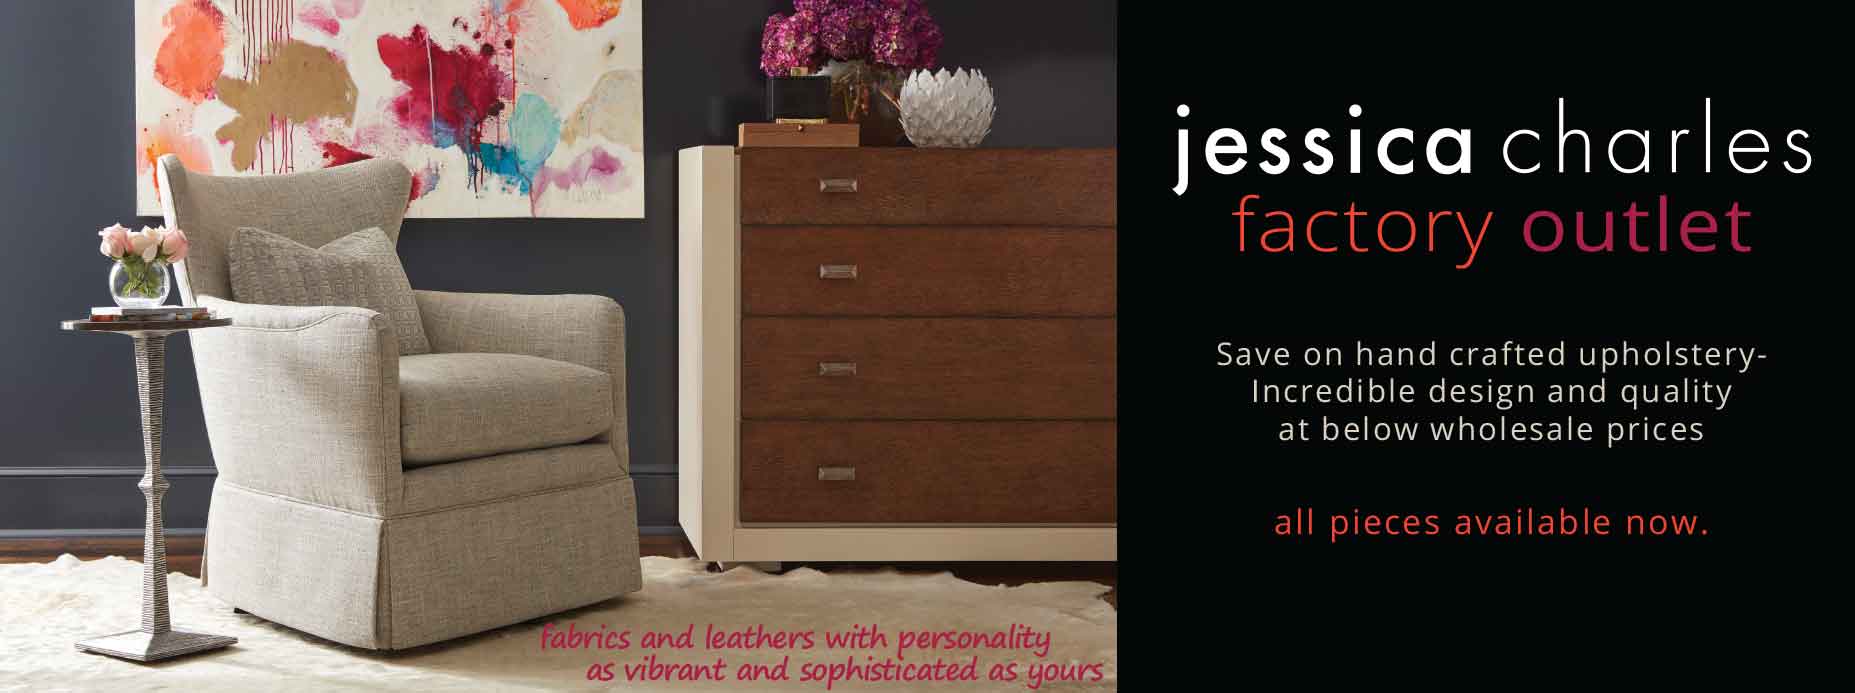 Jessica Charles Furniture Factory Outlet Sale